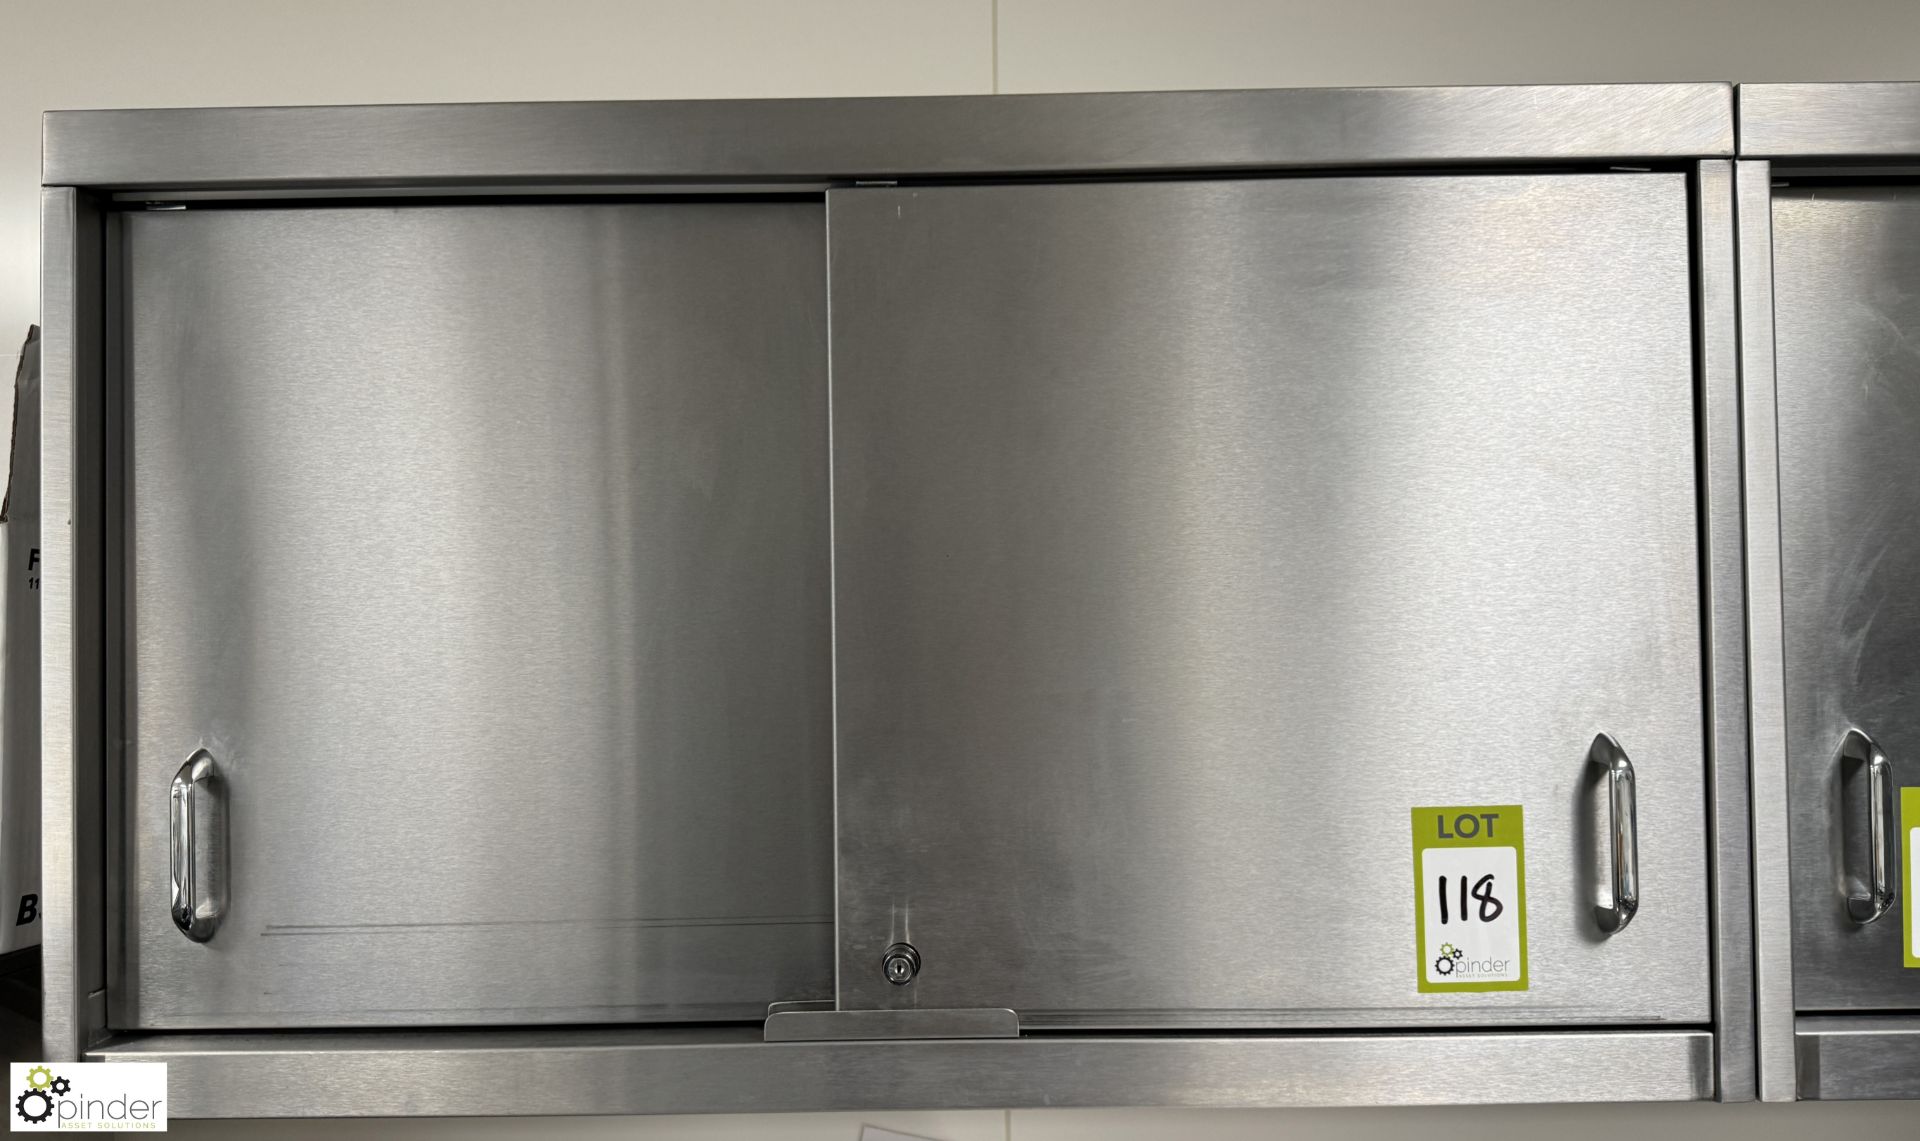 2 stainless steel wall mounted Cabinets, 1000mm x 300mm x 600mm (location in building - level 7) - Bild 3 aus 5